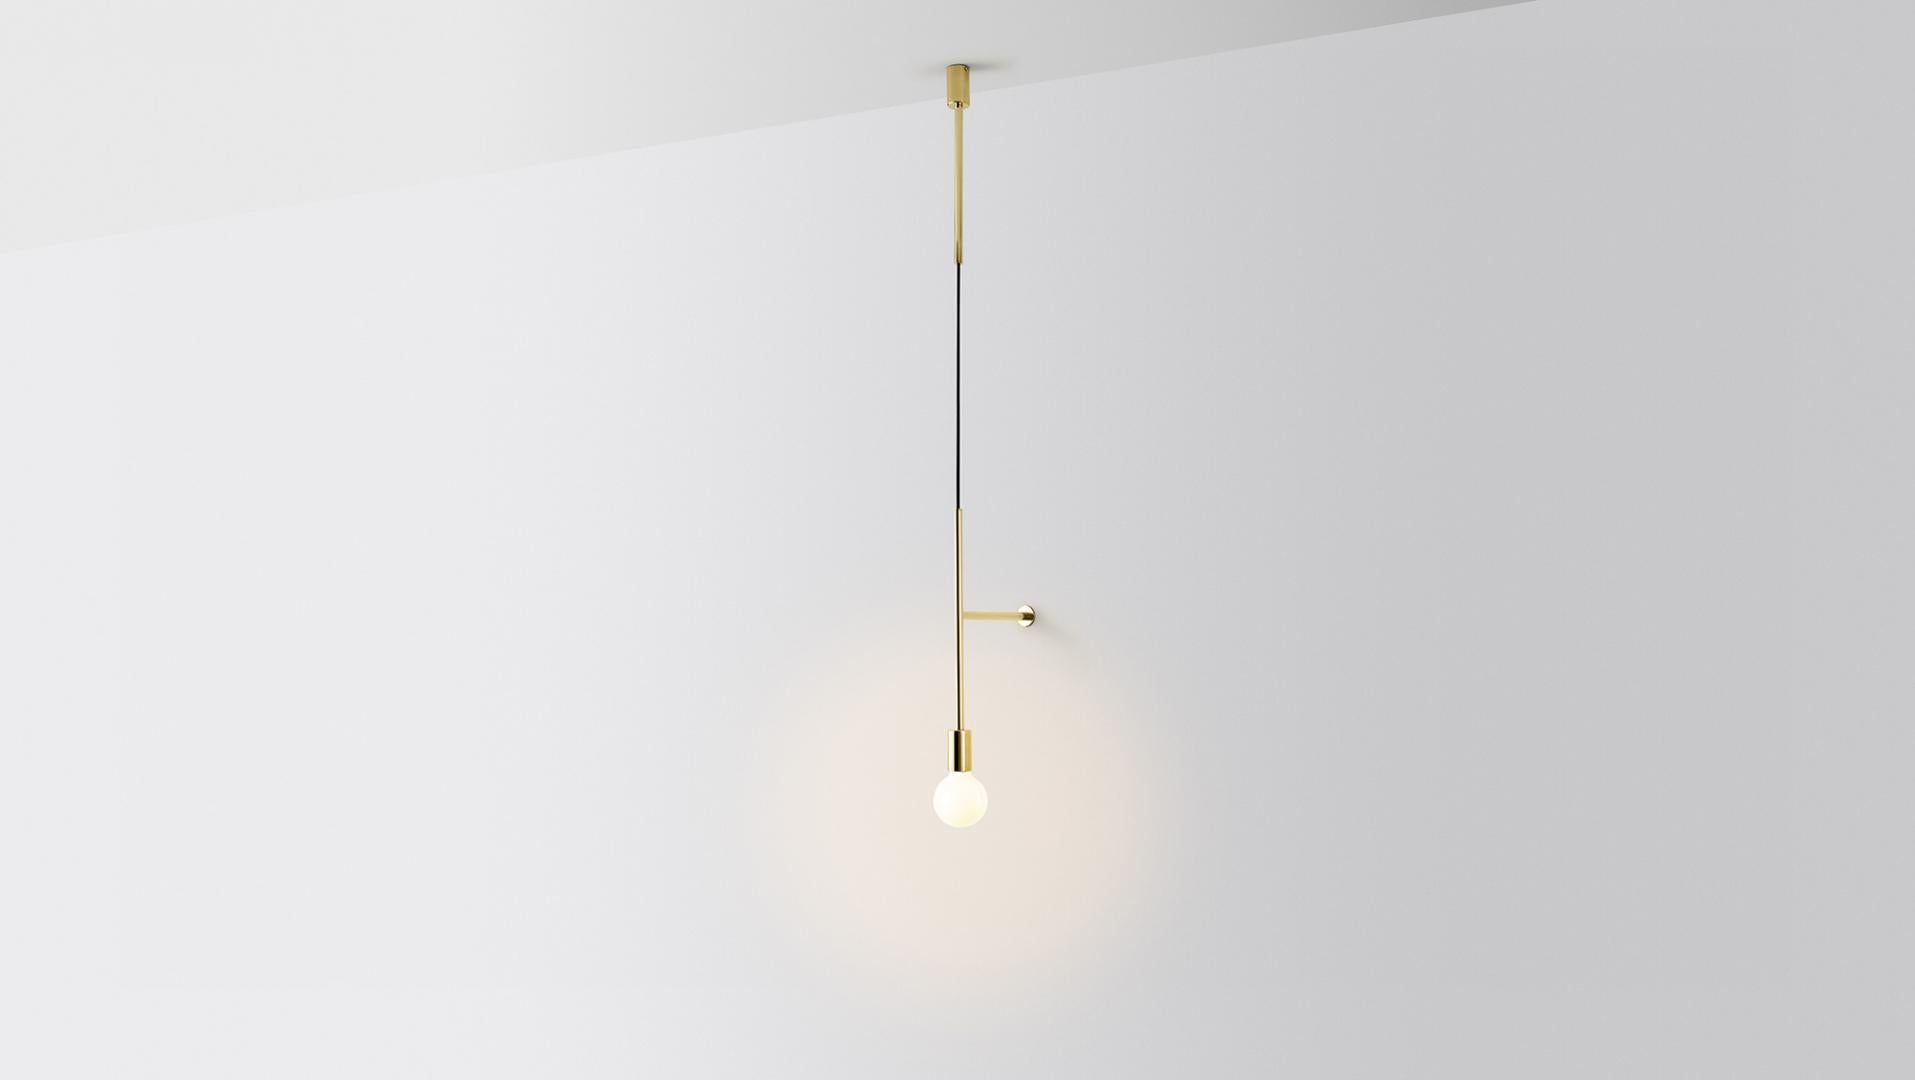 Wall step light by Volker Haug
Dimensions: D 24.8 x W 9.5 x H 108 cm 
Material: Brass. 
Finishes: Polished, aged, brushed, bronzed, blackened, or plated
Cord: Fabric or metal
Lamp: Opal G95 LED (E26/E27 110 - 240V, 12V version